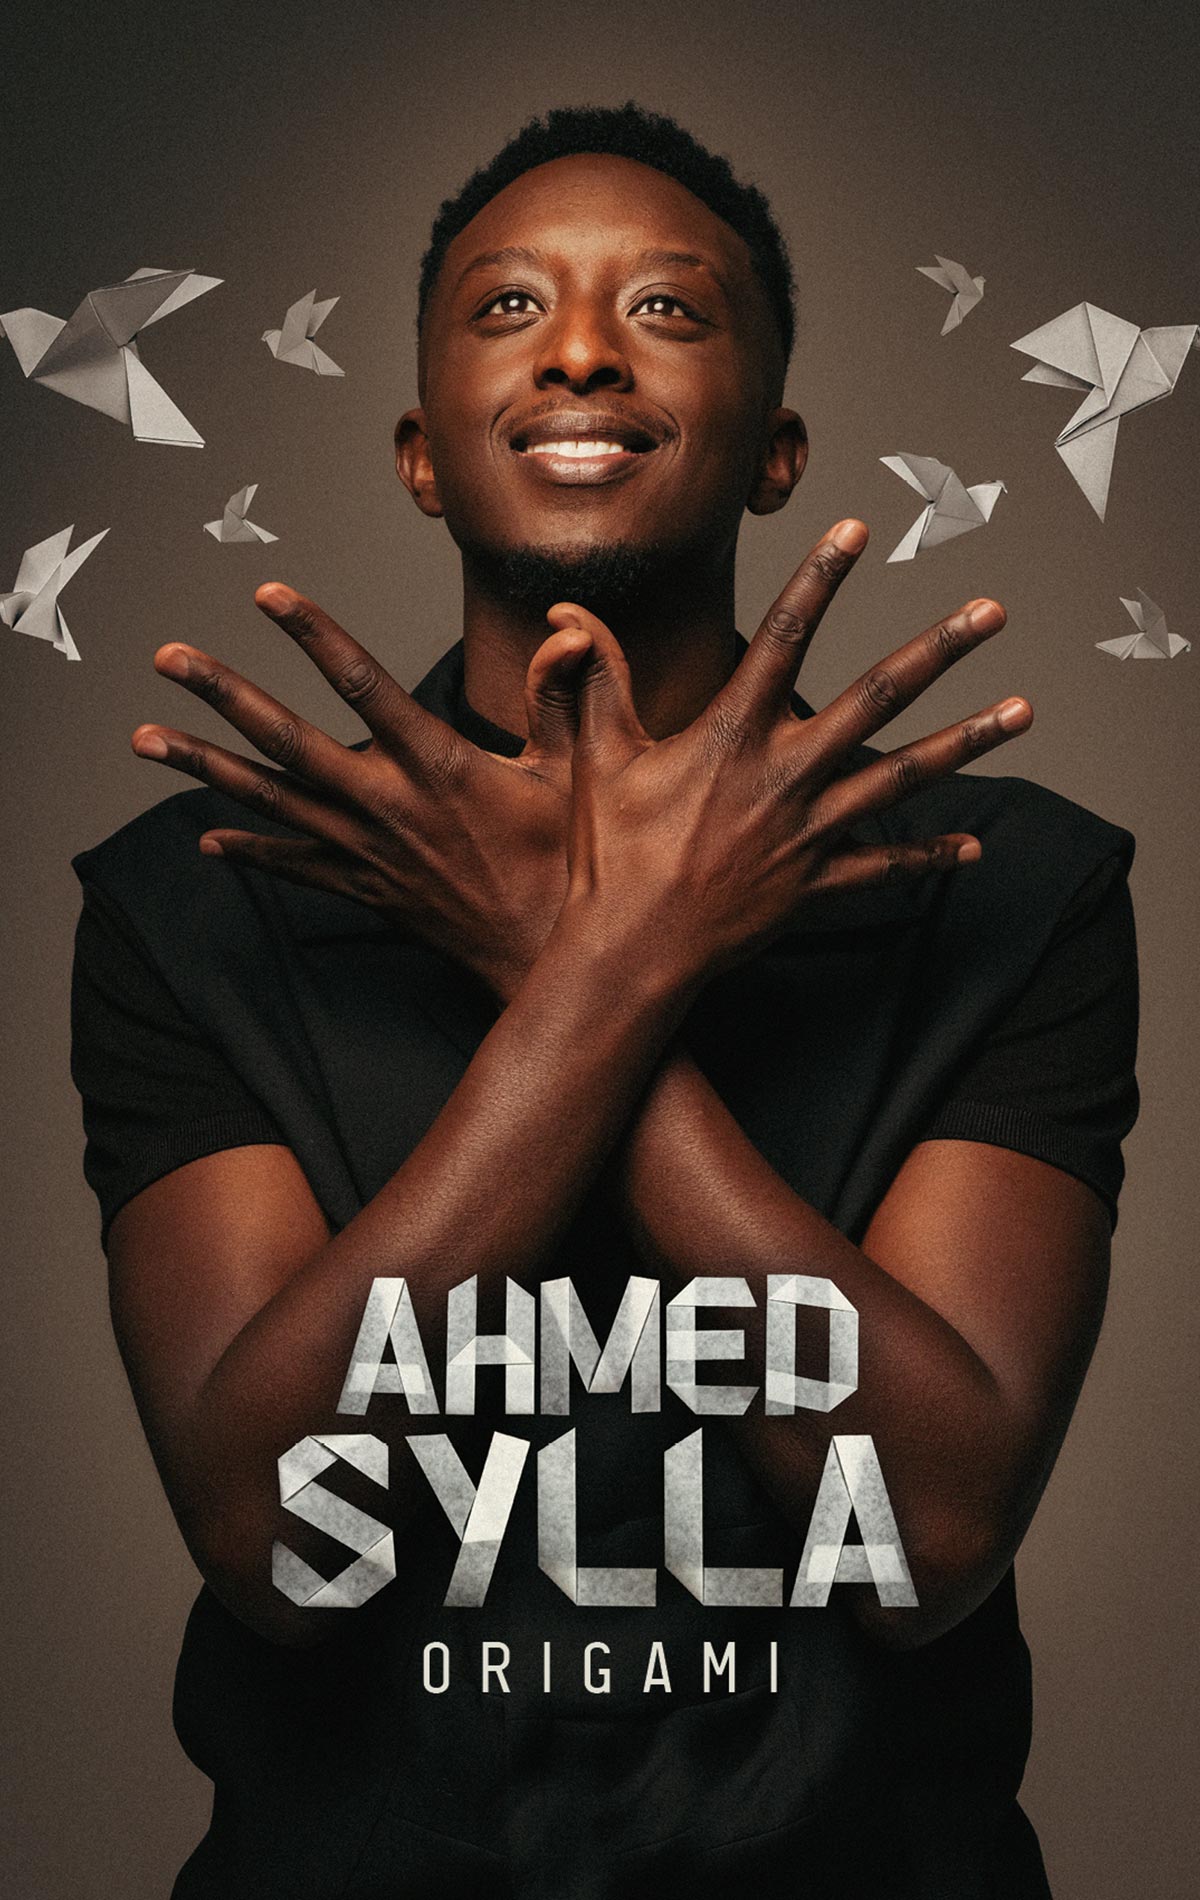 Billets Ahmed Sylla (Centre des Congres Angers - Angers)